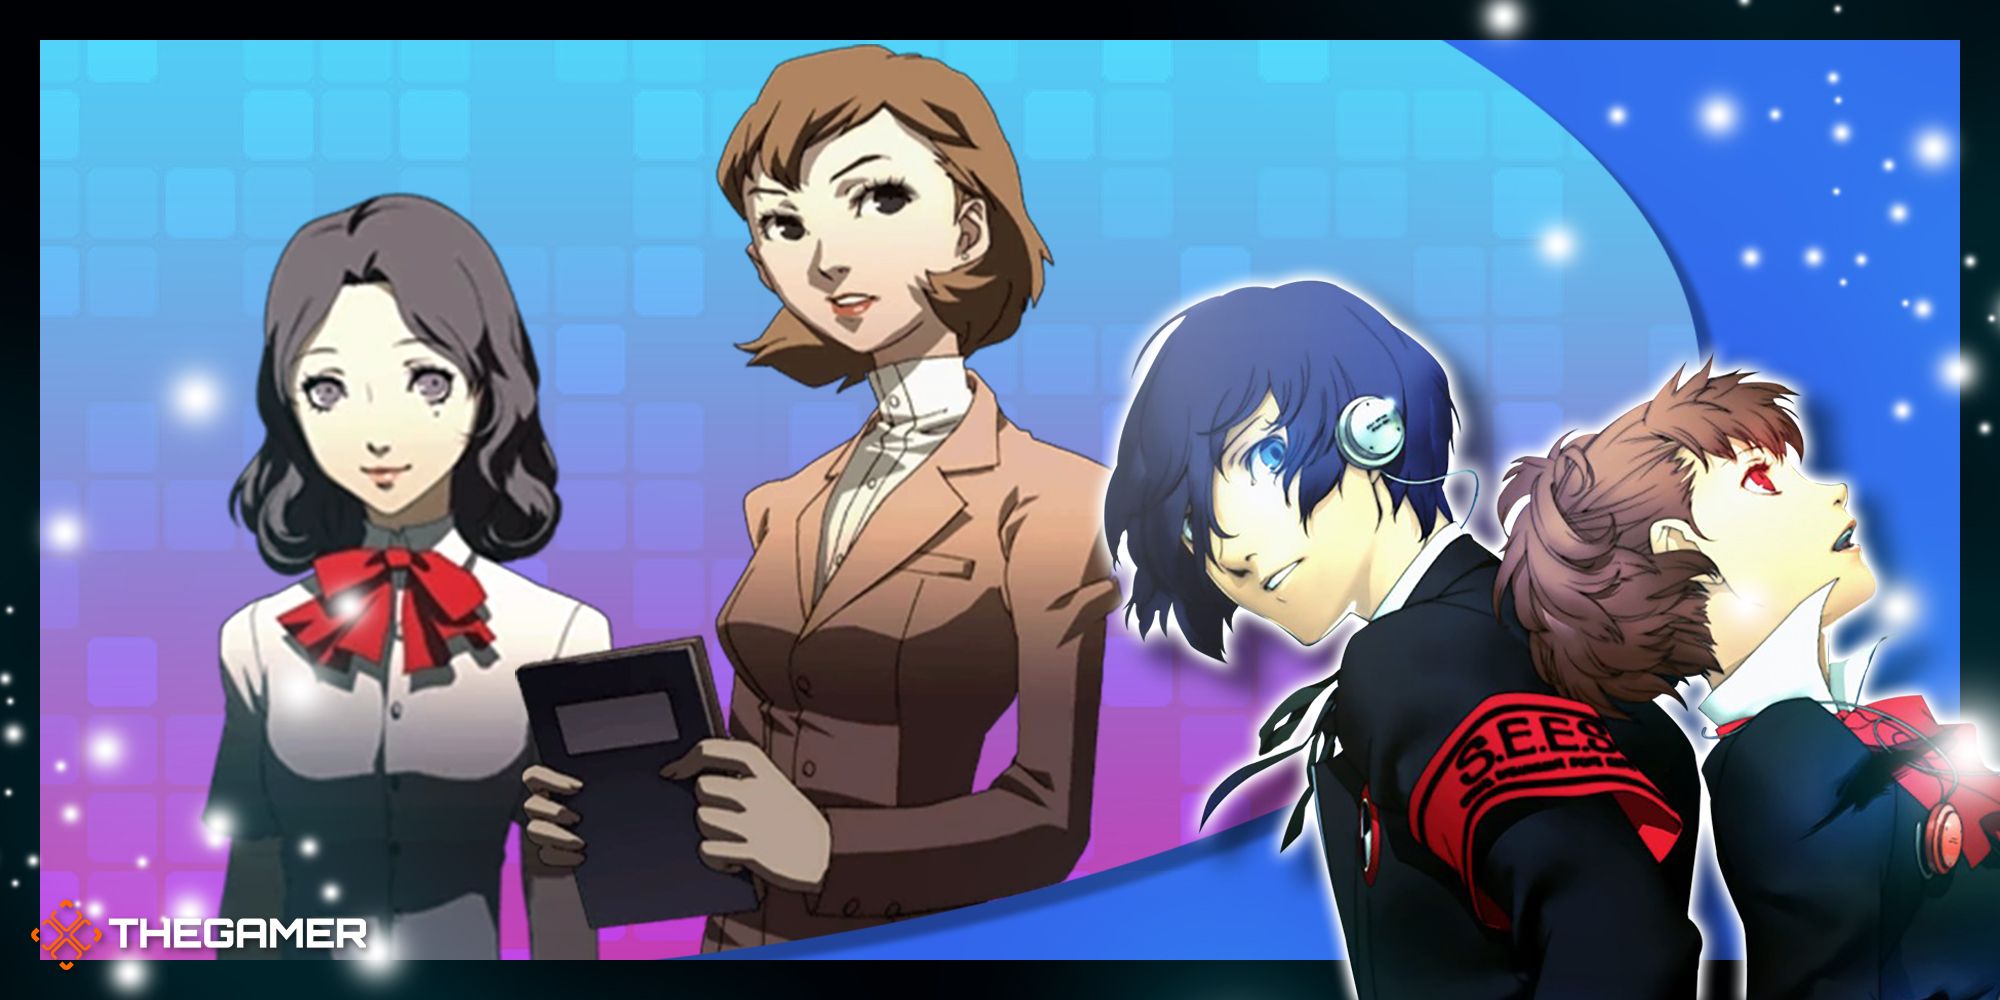 How To Rank Up The Hermit Social Link In Persona 3 Portable